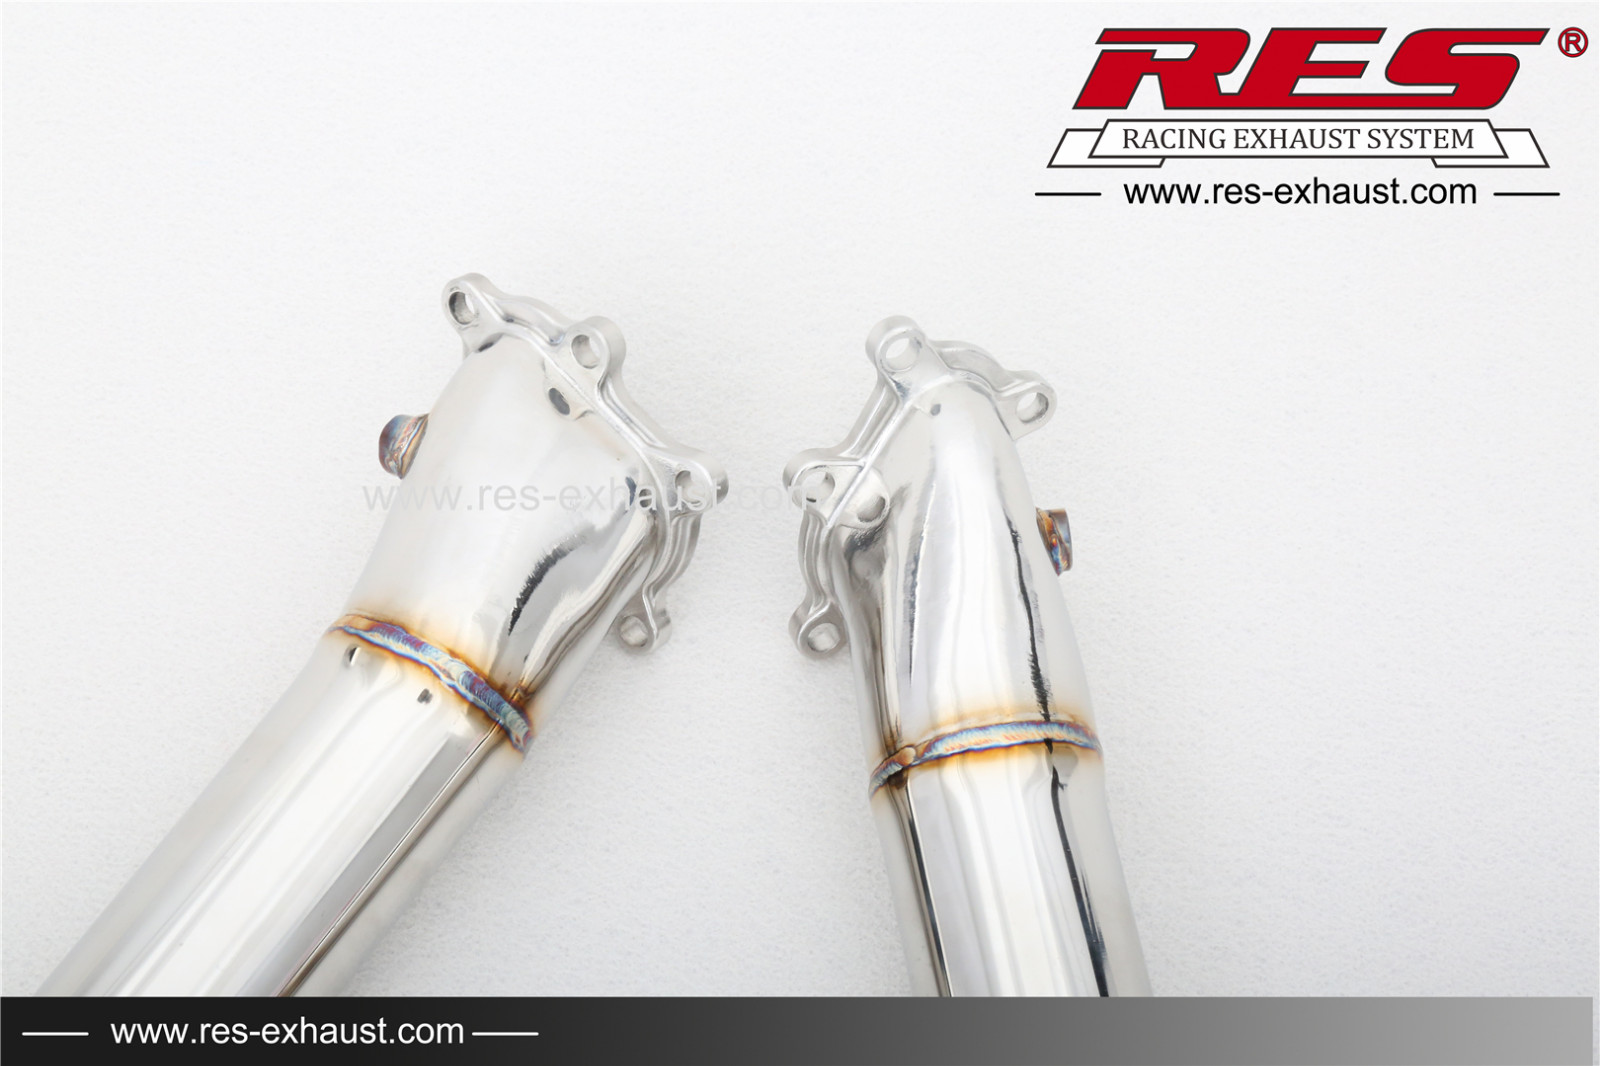 Downpipe-RES Exhaust » High Performance Exhaust System Where to buy